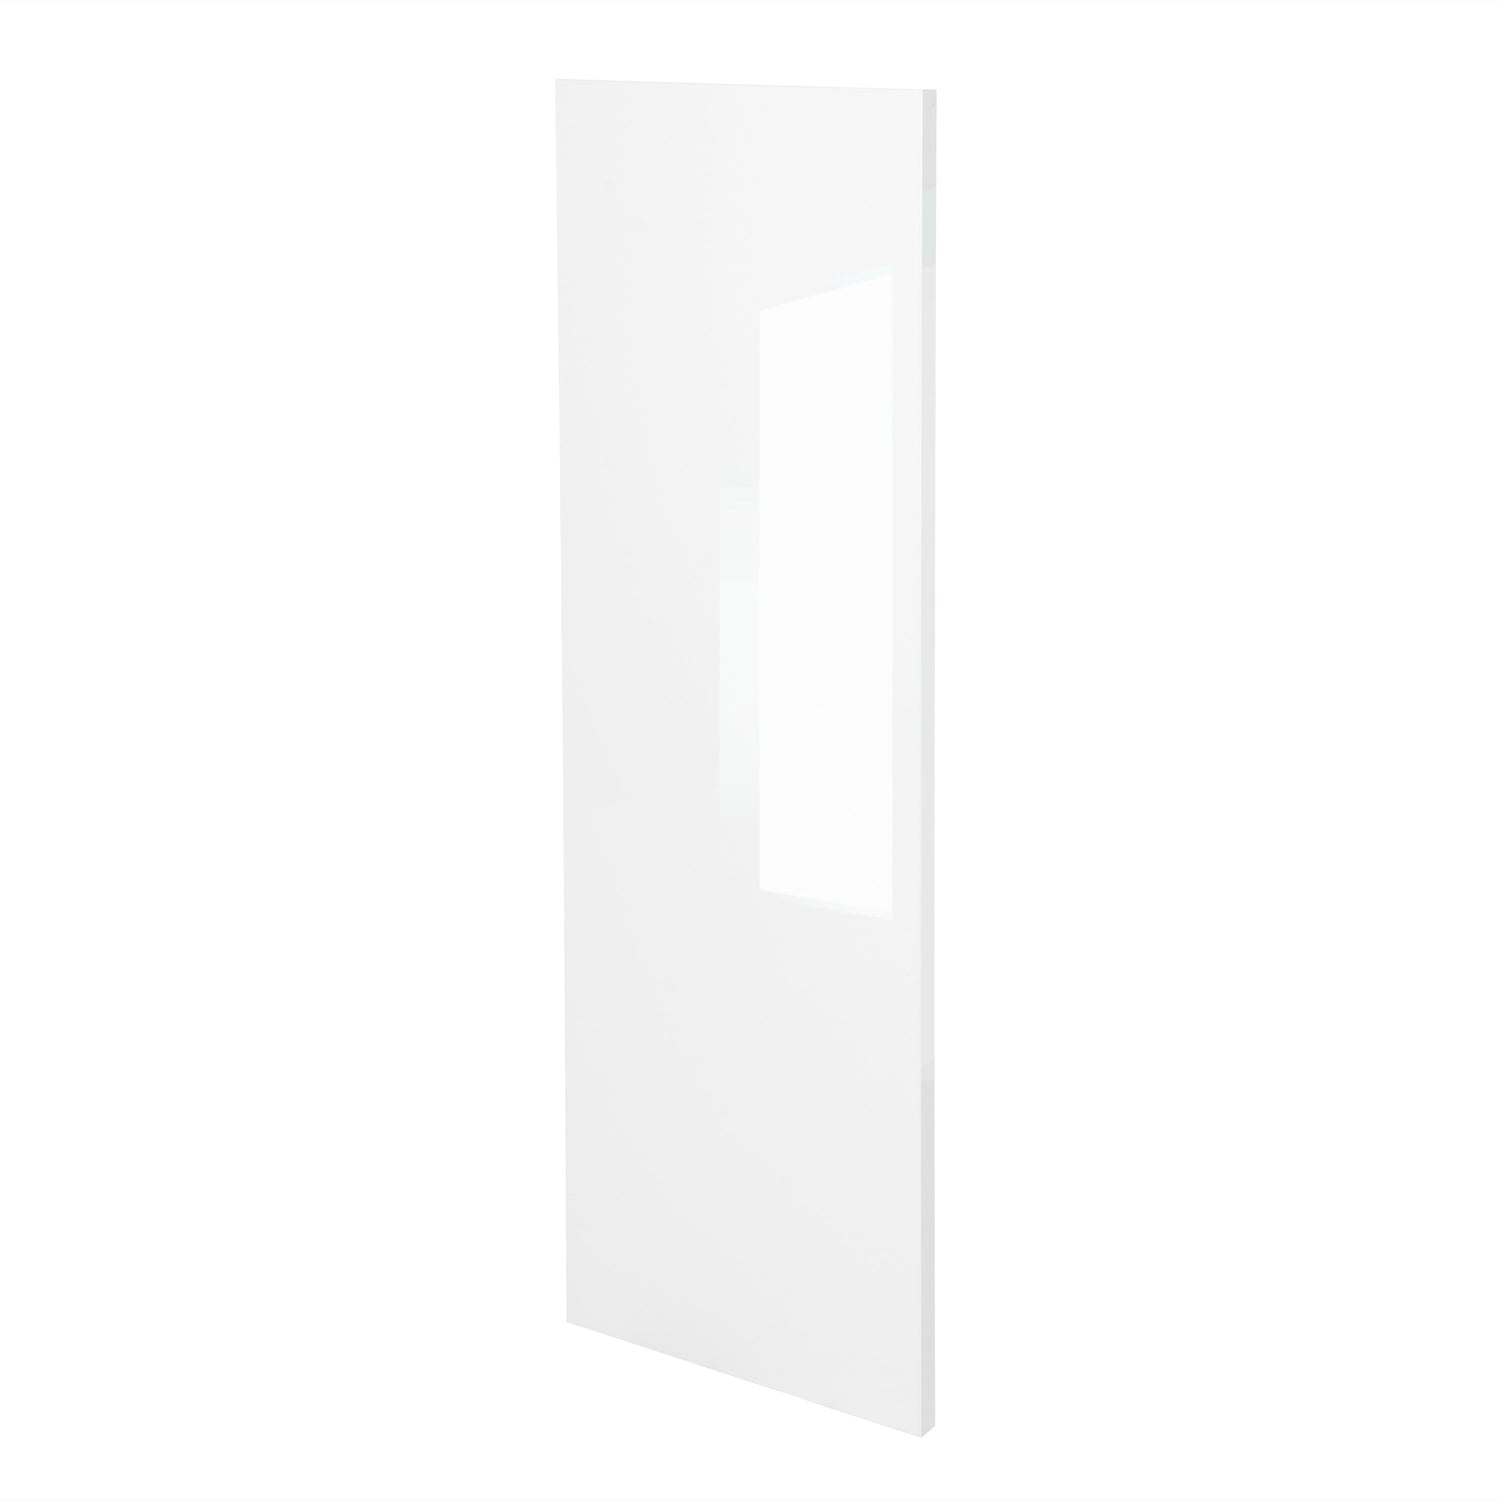 White Gloss Slab Style Wall Kitchen Cabinet End Panel (12 in W x 0.75 in D x 30 in H) -  Pro-Edge HD